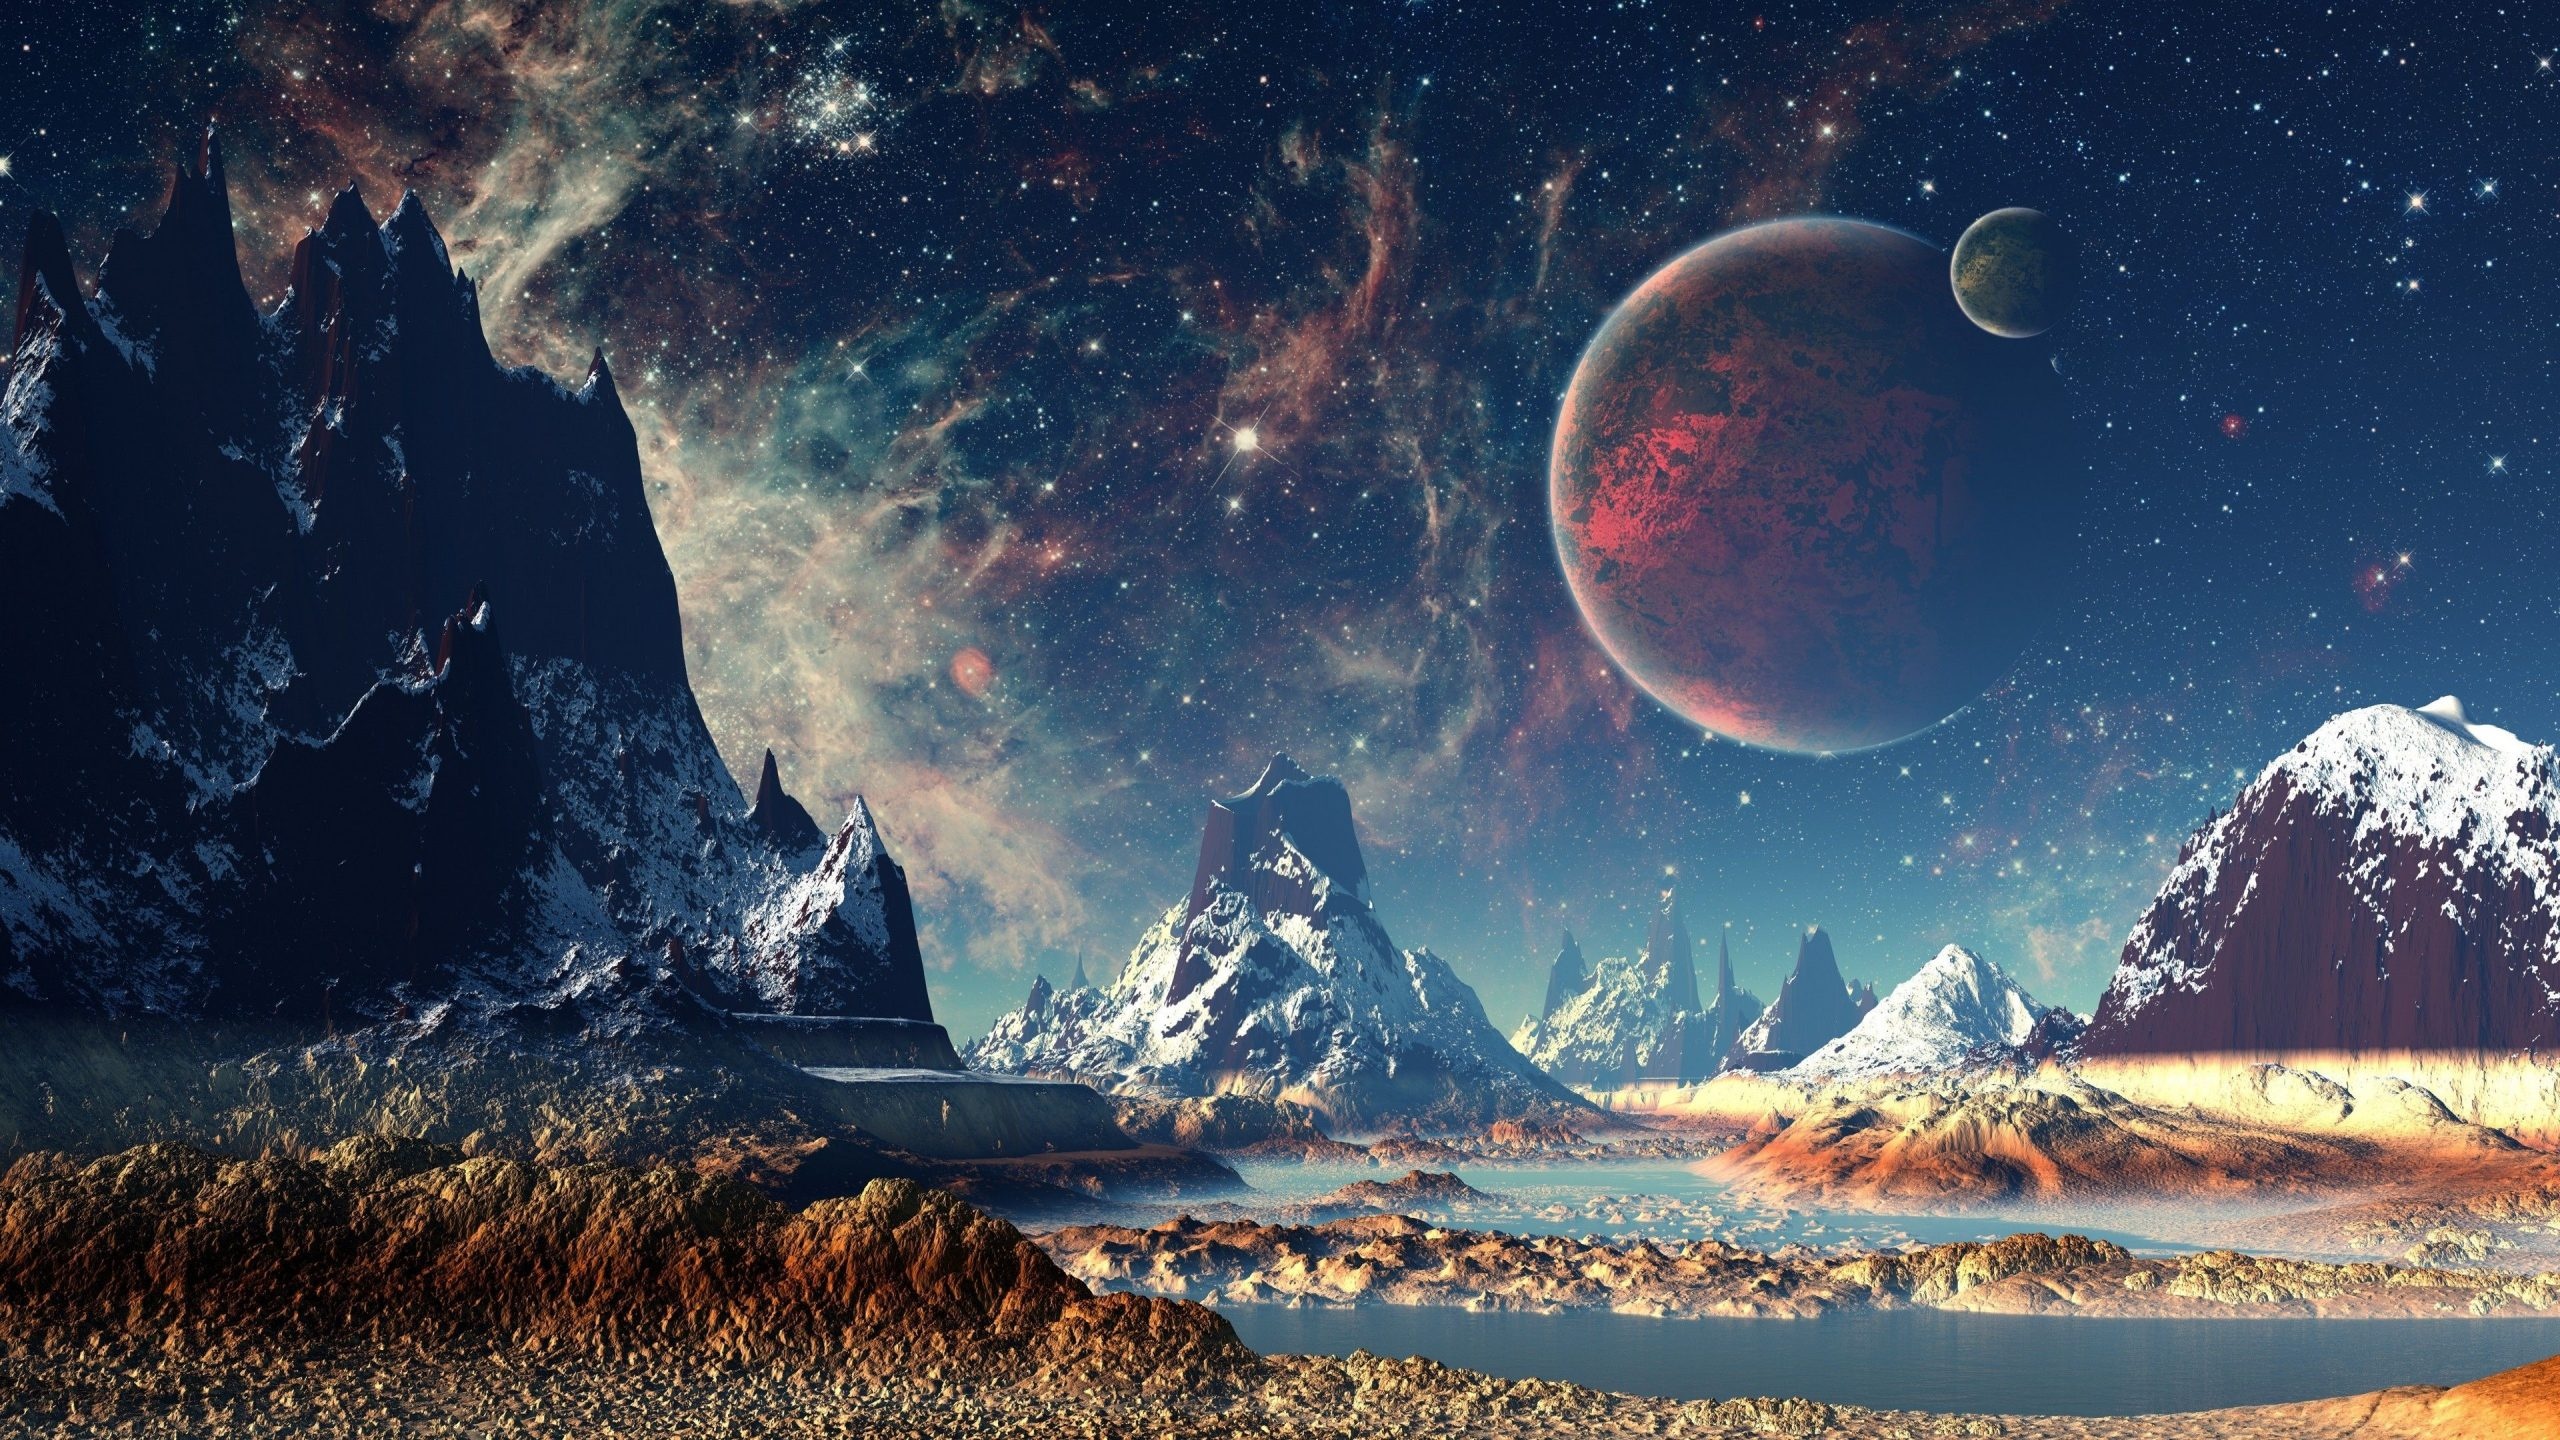 Lost Planet wallpaper, Backgrounds, Lost Planet, Gaming, 2560x1440 HD Desktop